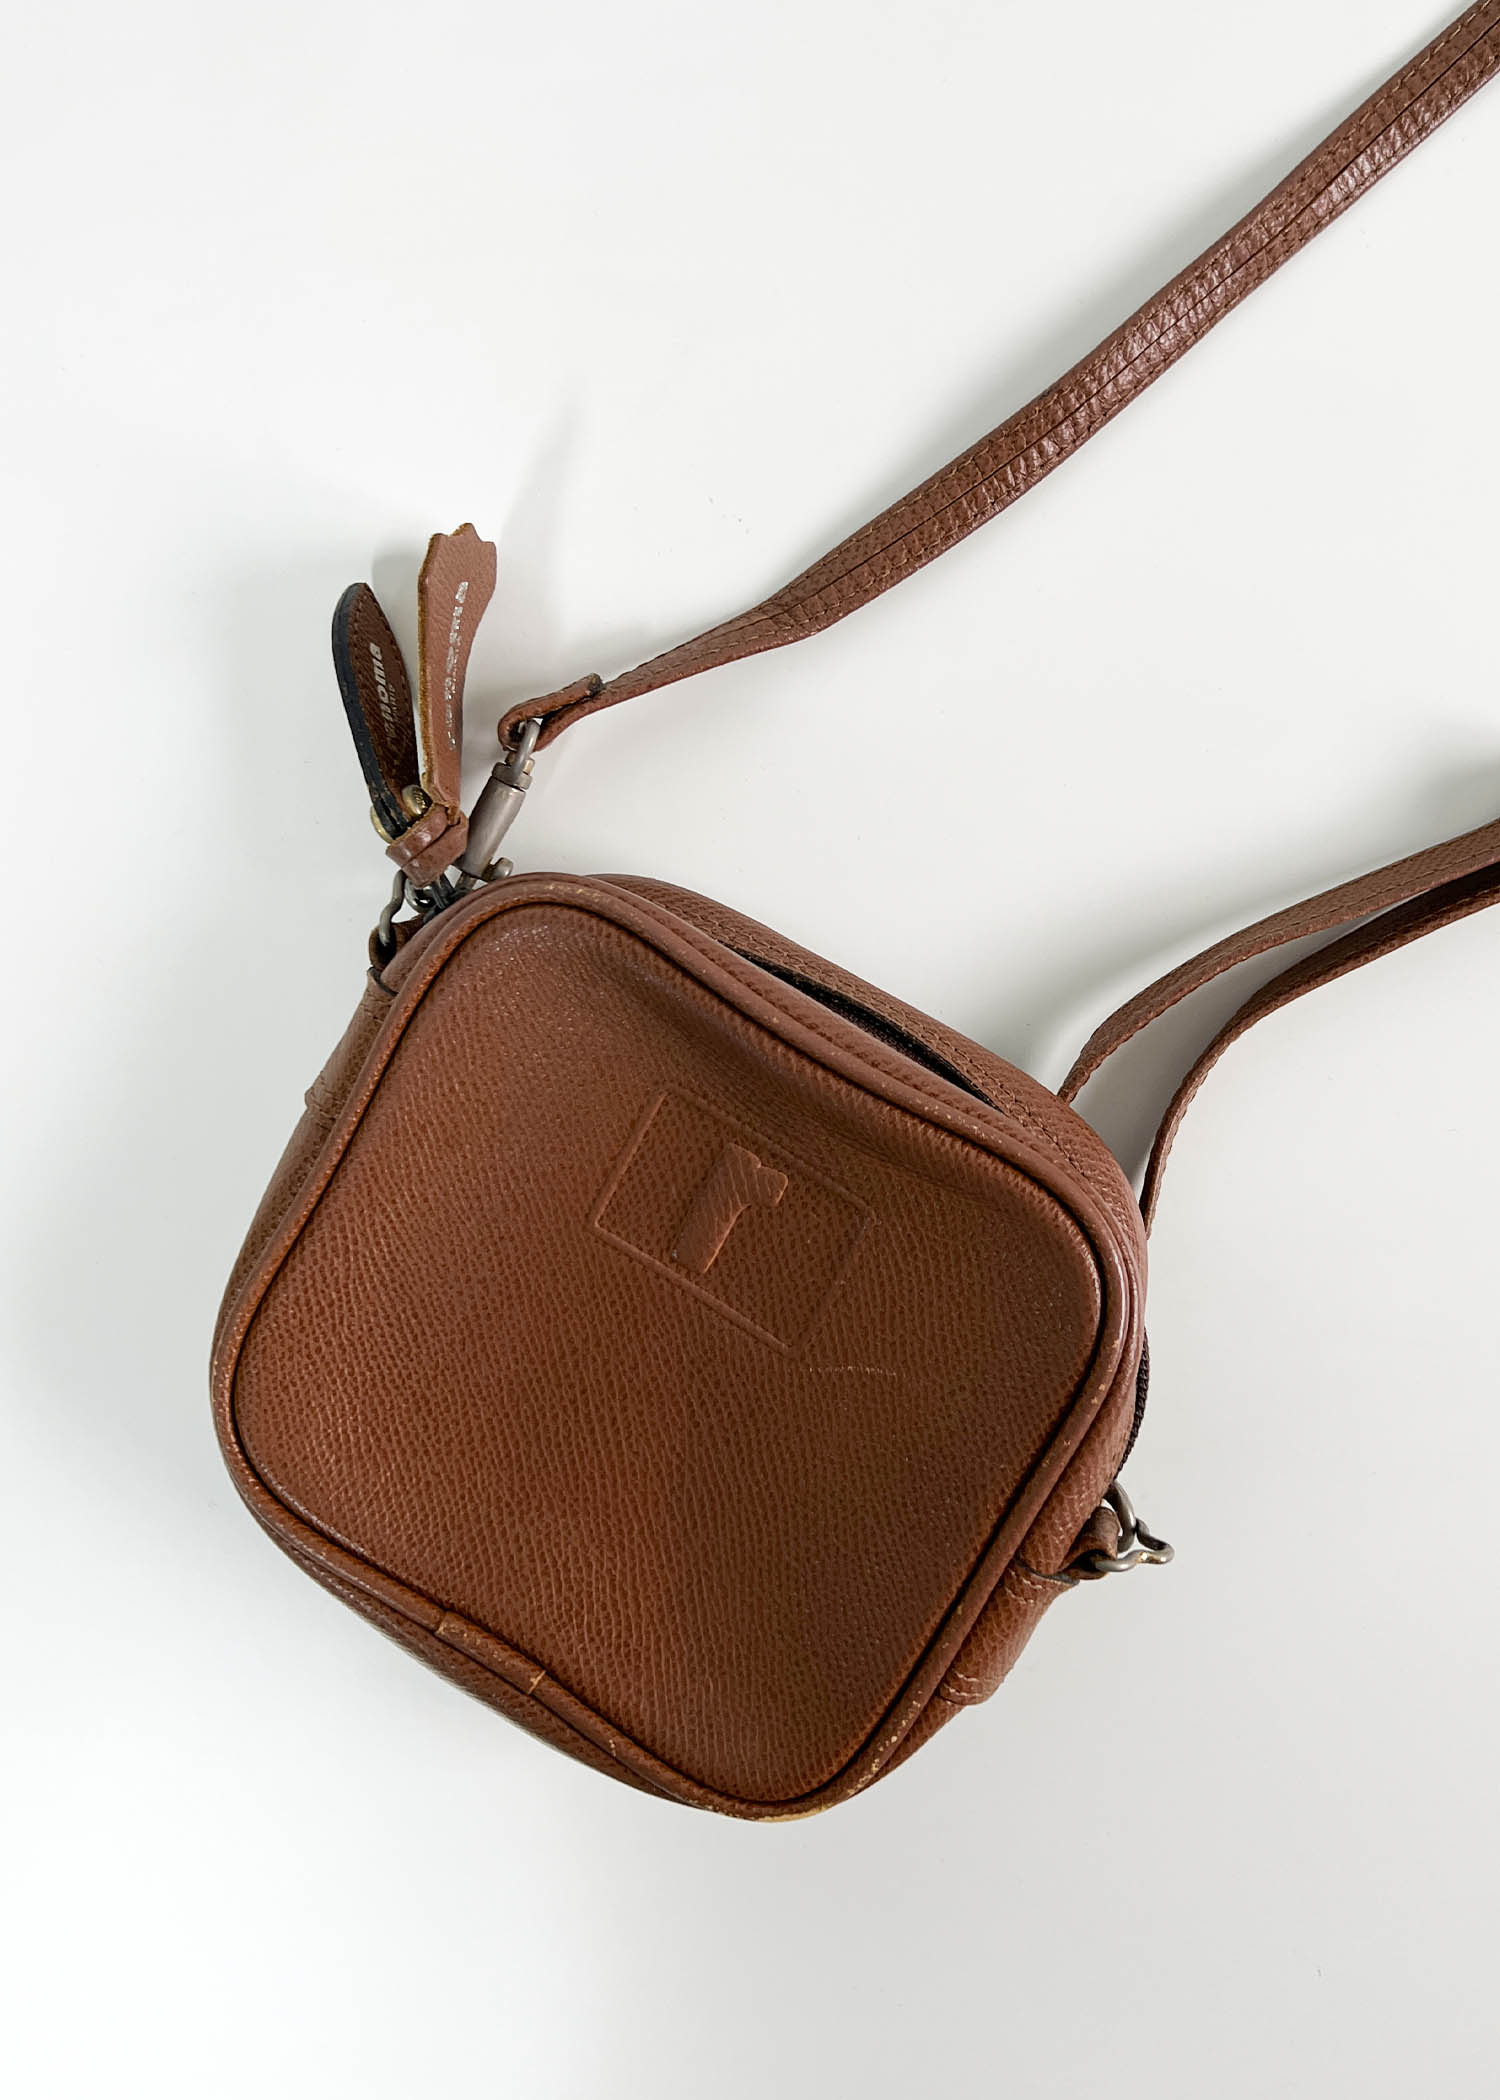 renoma small leather bag